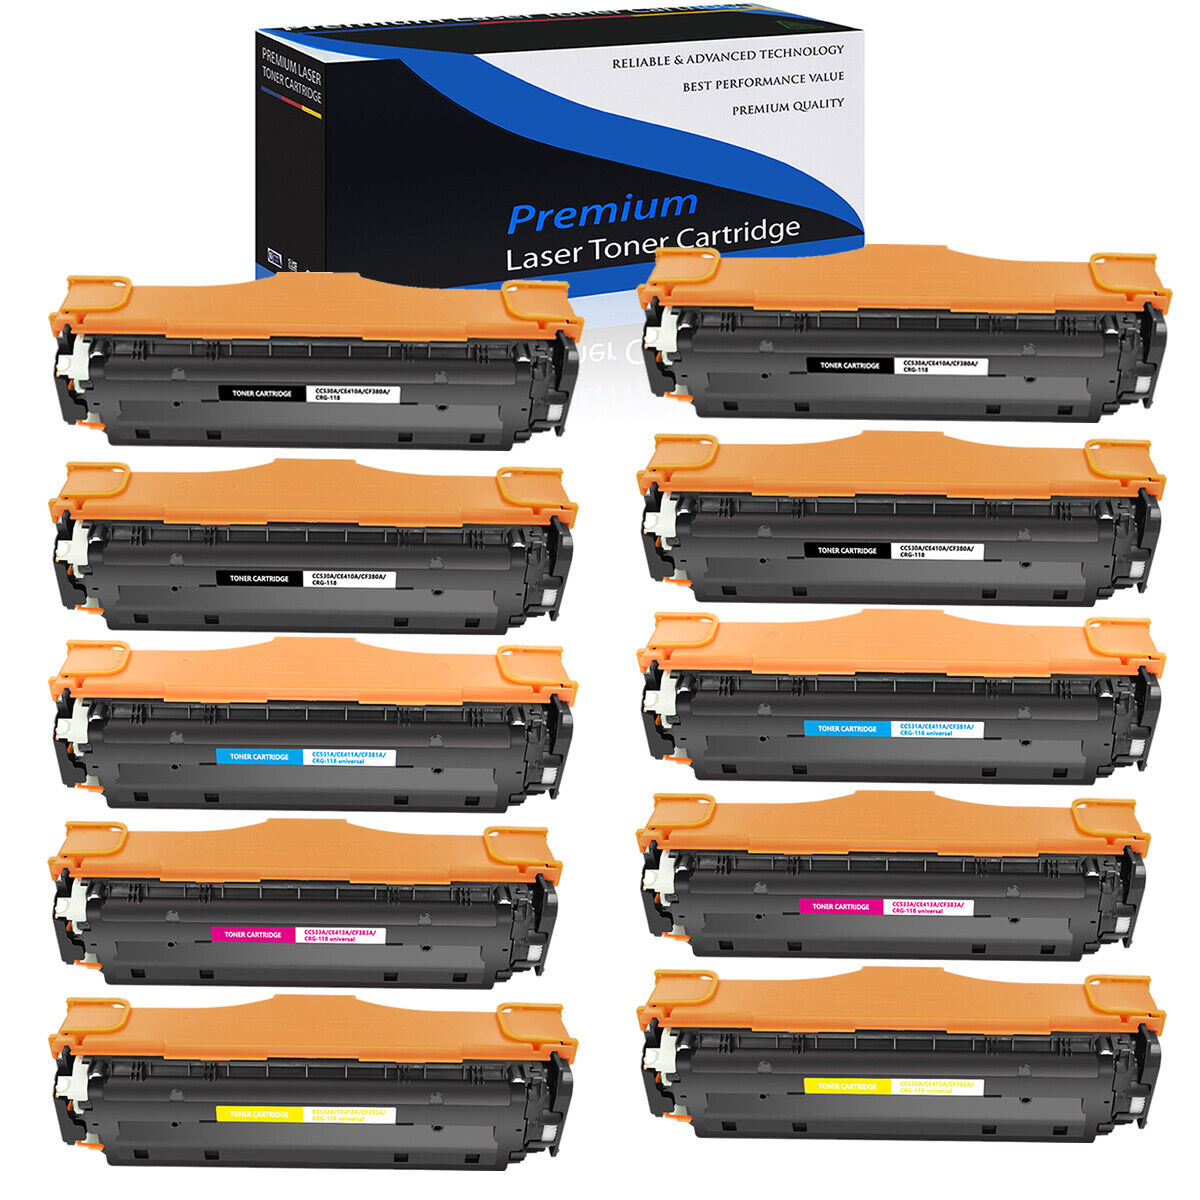 10PK Set CE410A -413A BK/C/M/Y Toner for HP LaserJet Pro 300 color MFP M375nw